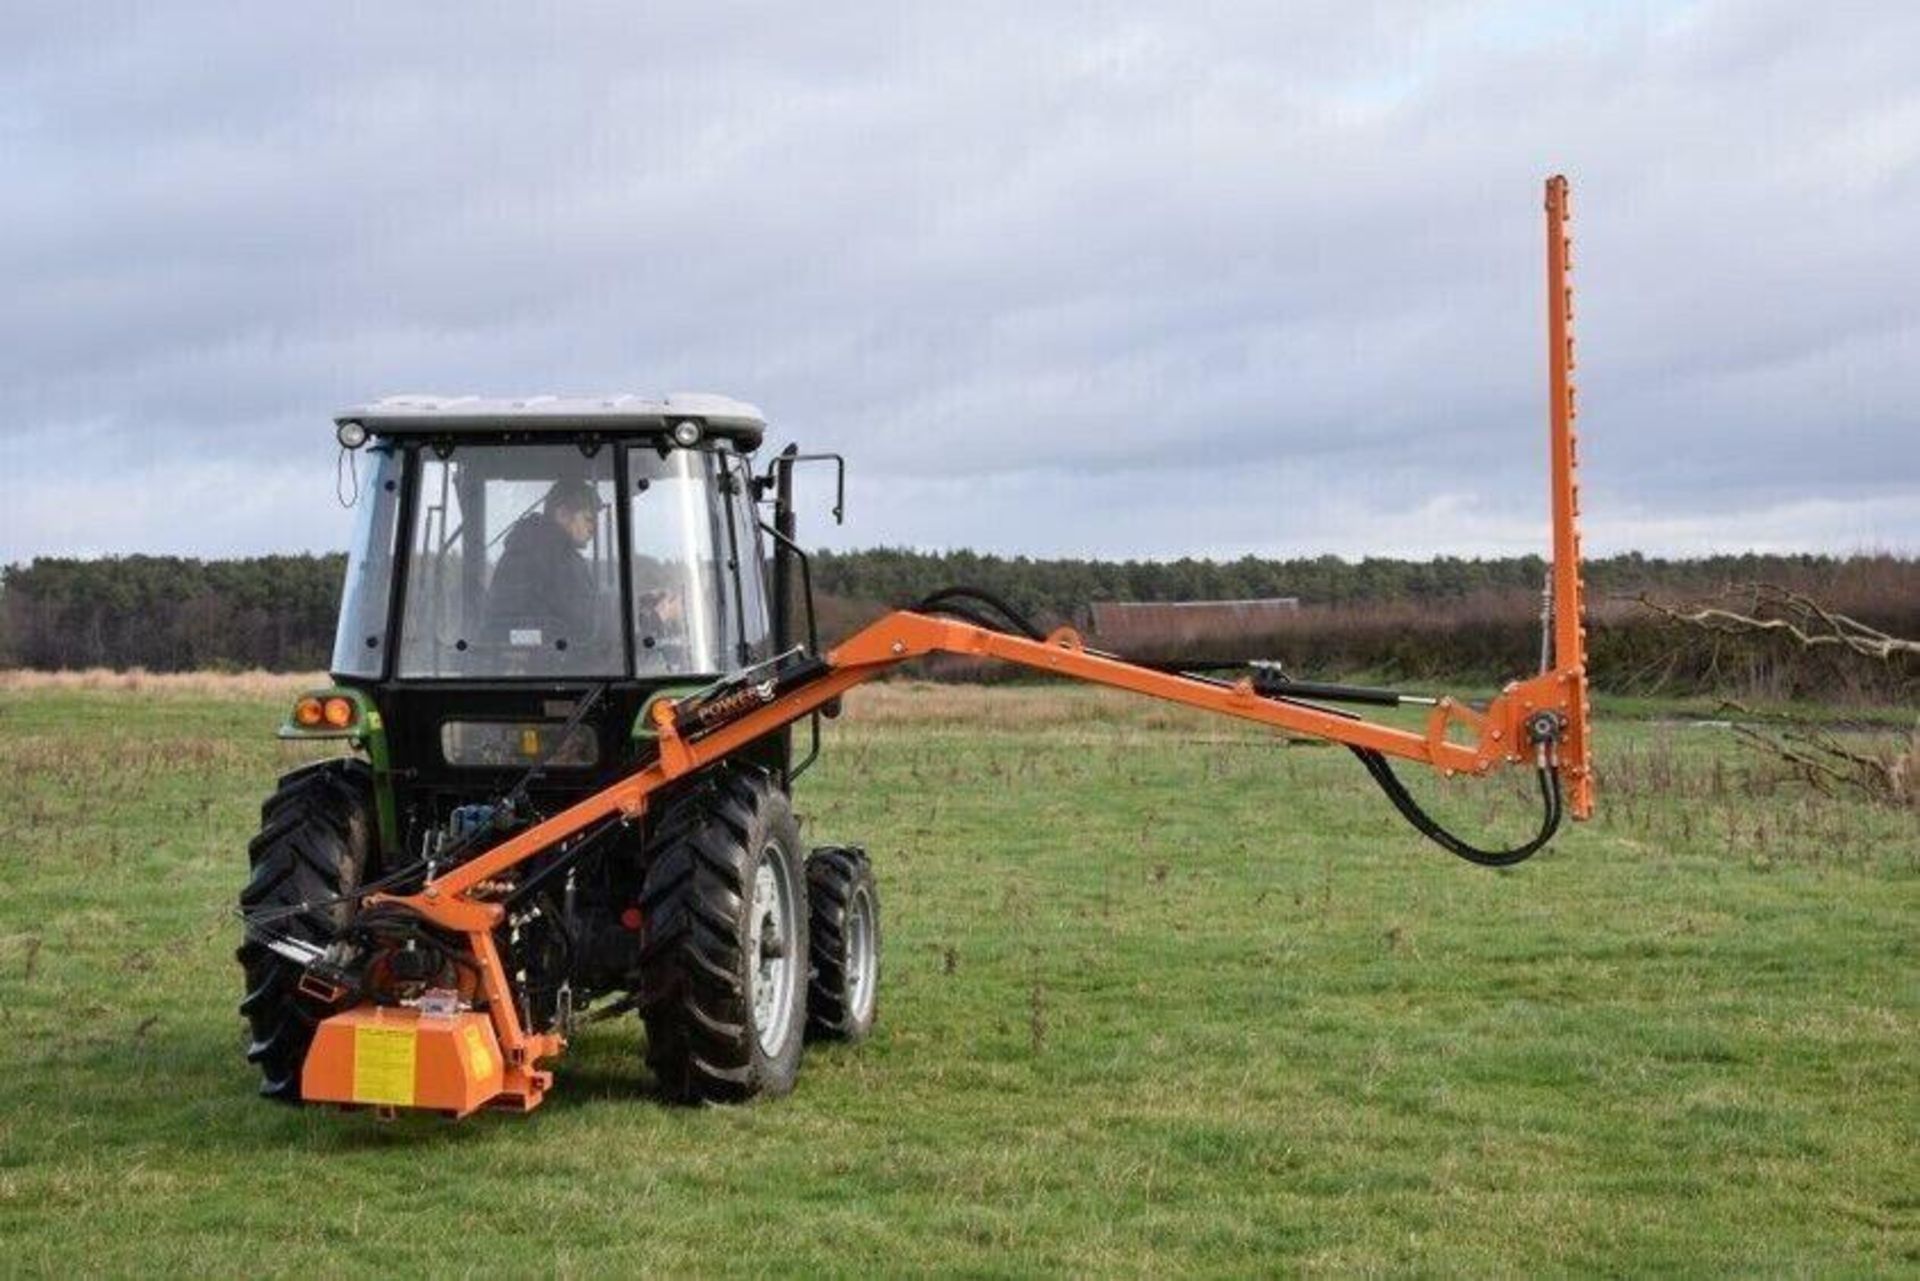 EFFICIENCY UNLEASHED: T190 FINGERBAR HEDGE CUTTER FOR FAST, CLEAN RESULTS